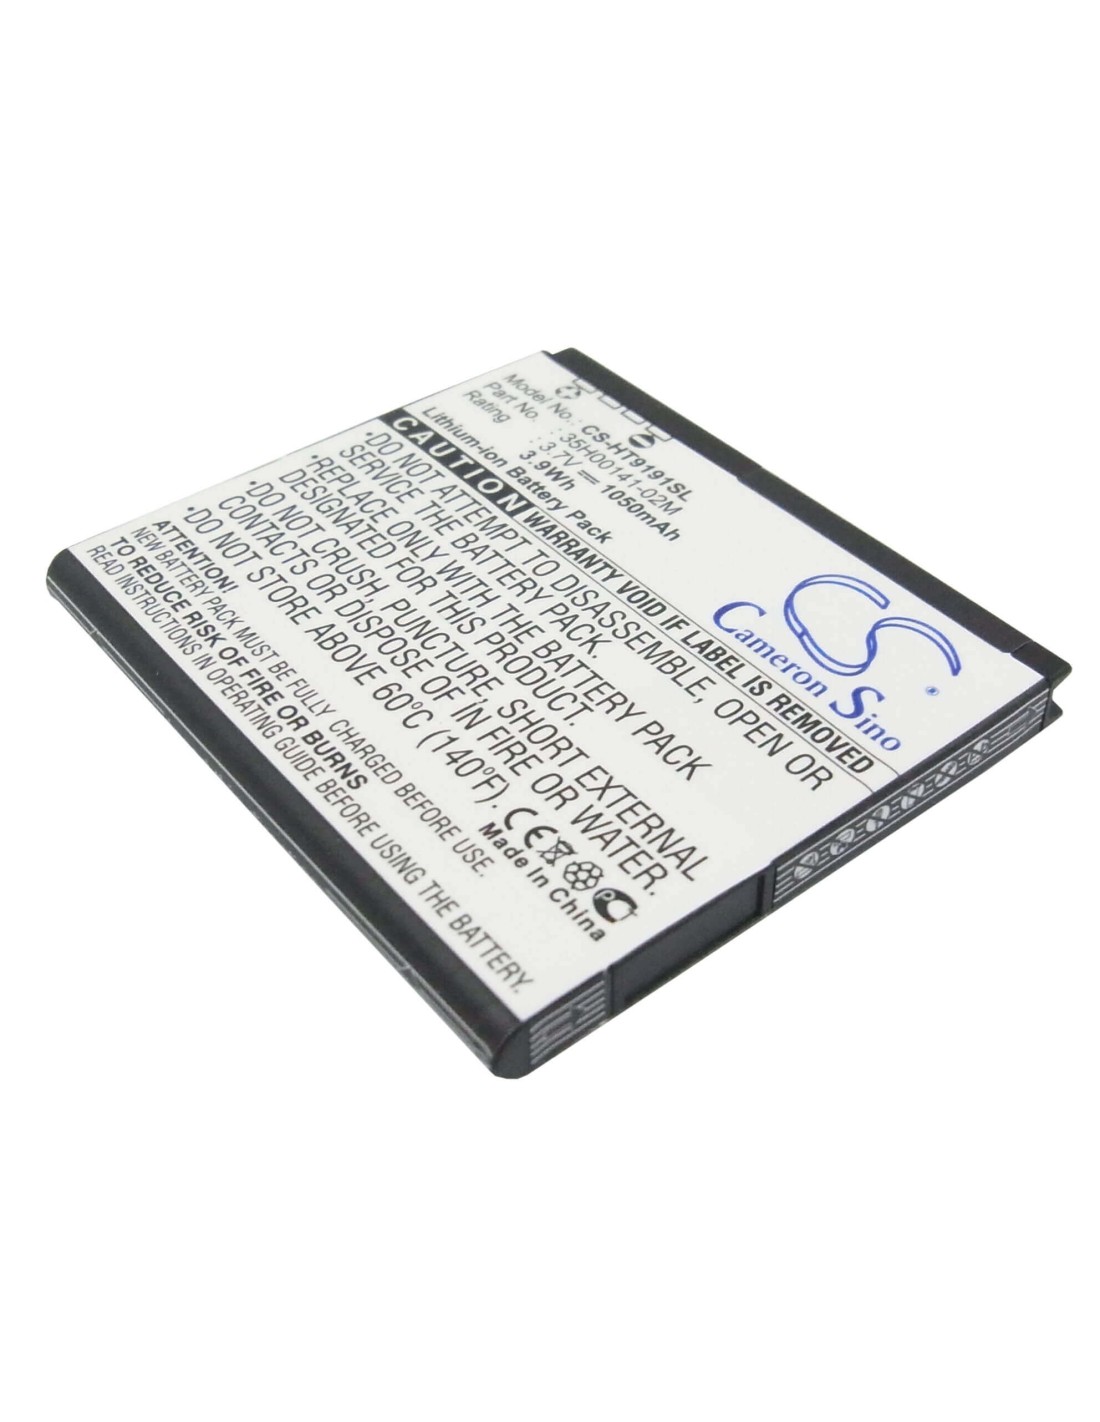 Battery for HTC Ace, Desire HD, A9191 3.7V, 1050mAh - 3.89Wh